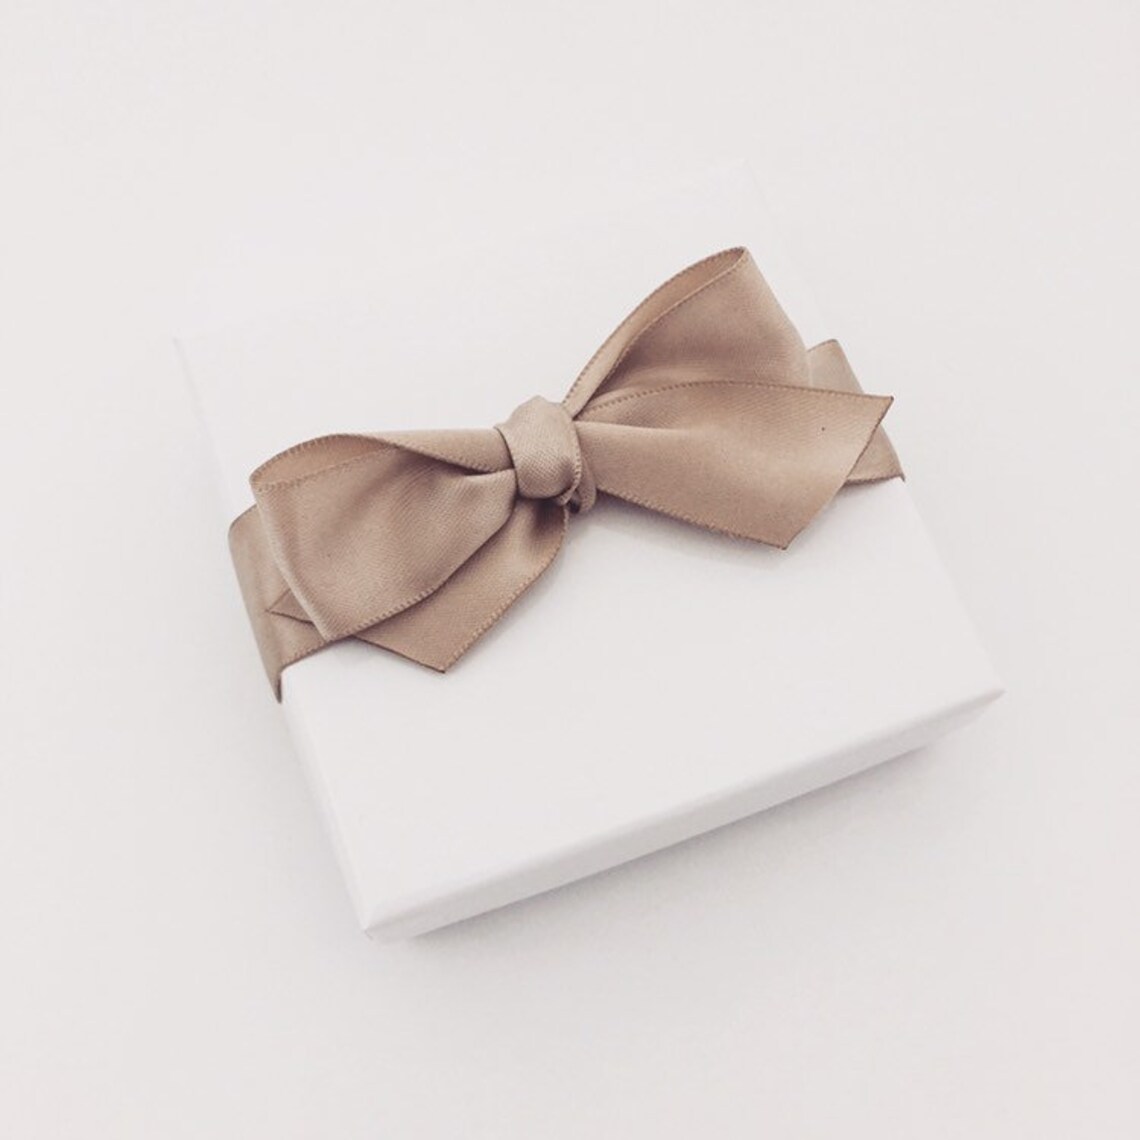 Gift Box Gift Wrap Upgrade Toffee Ribbon White Box With - Etsy